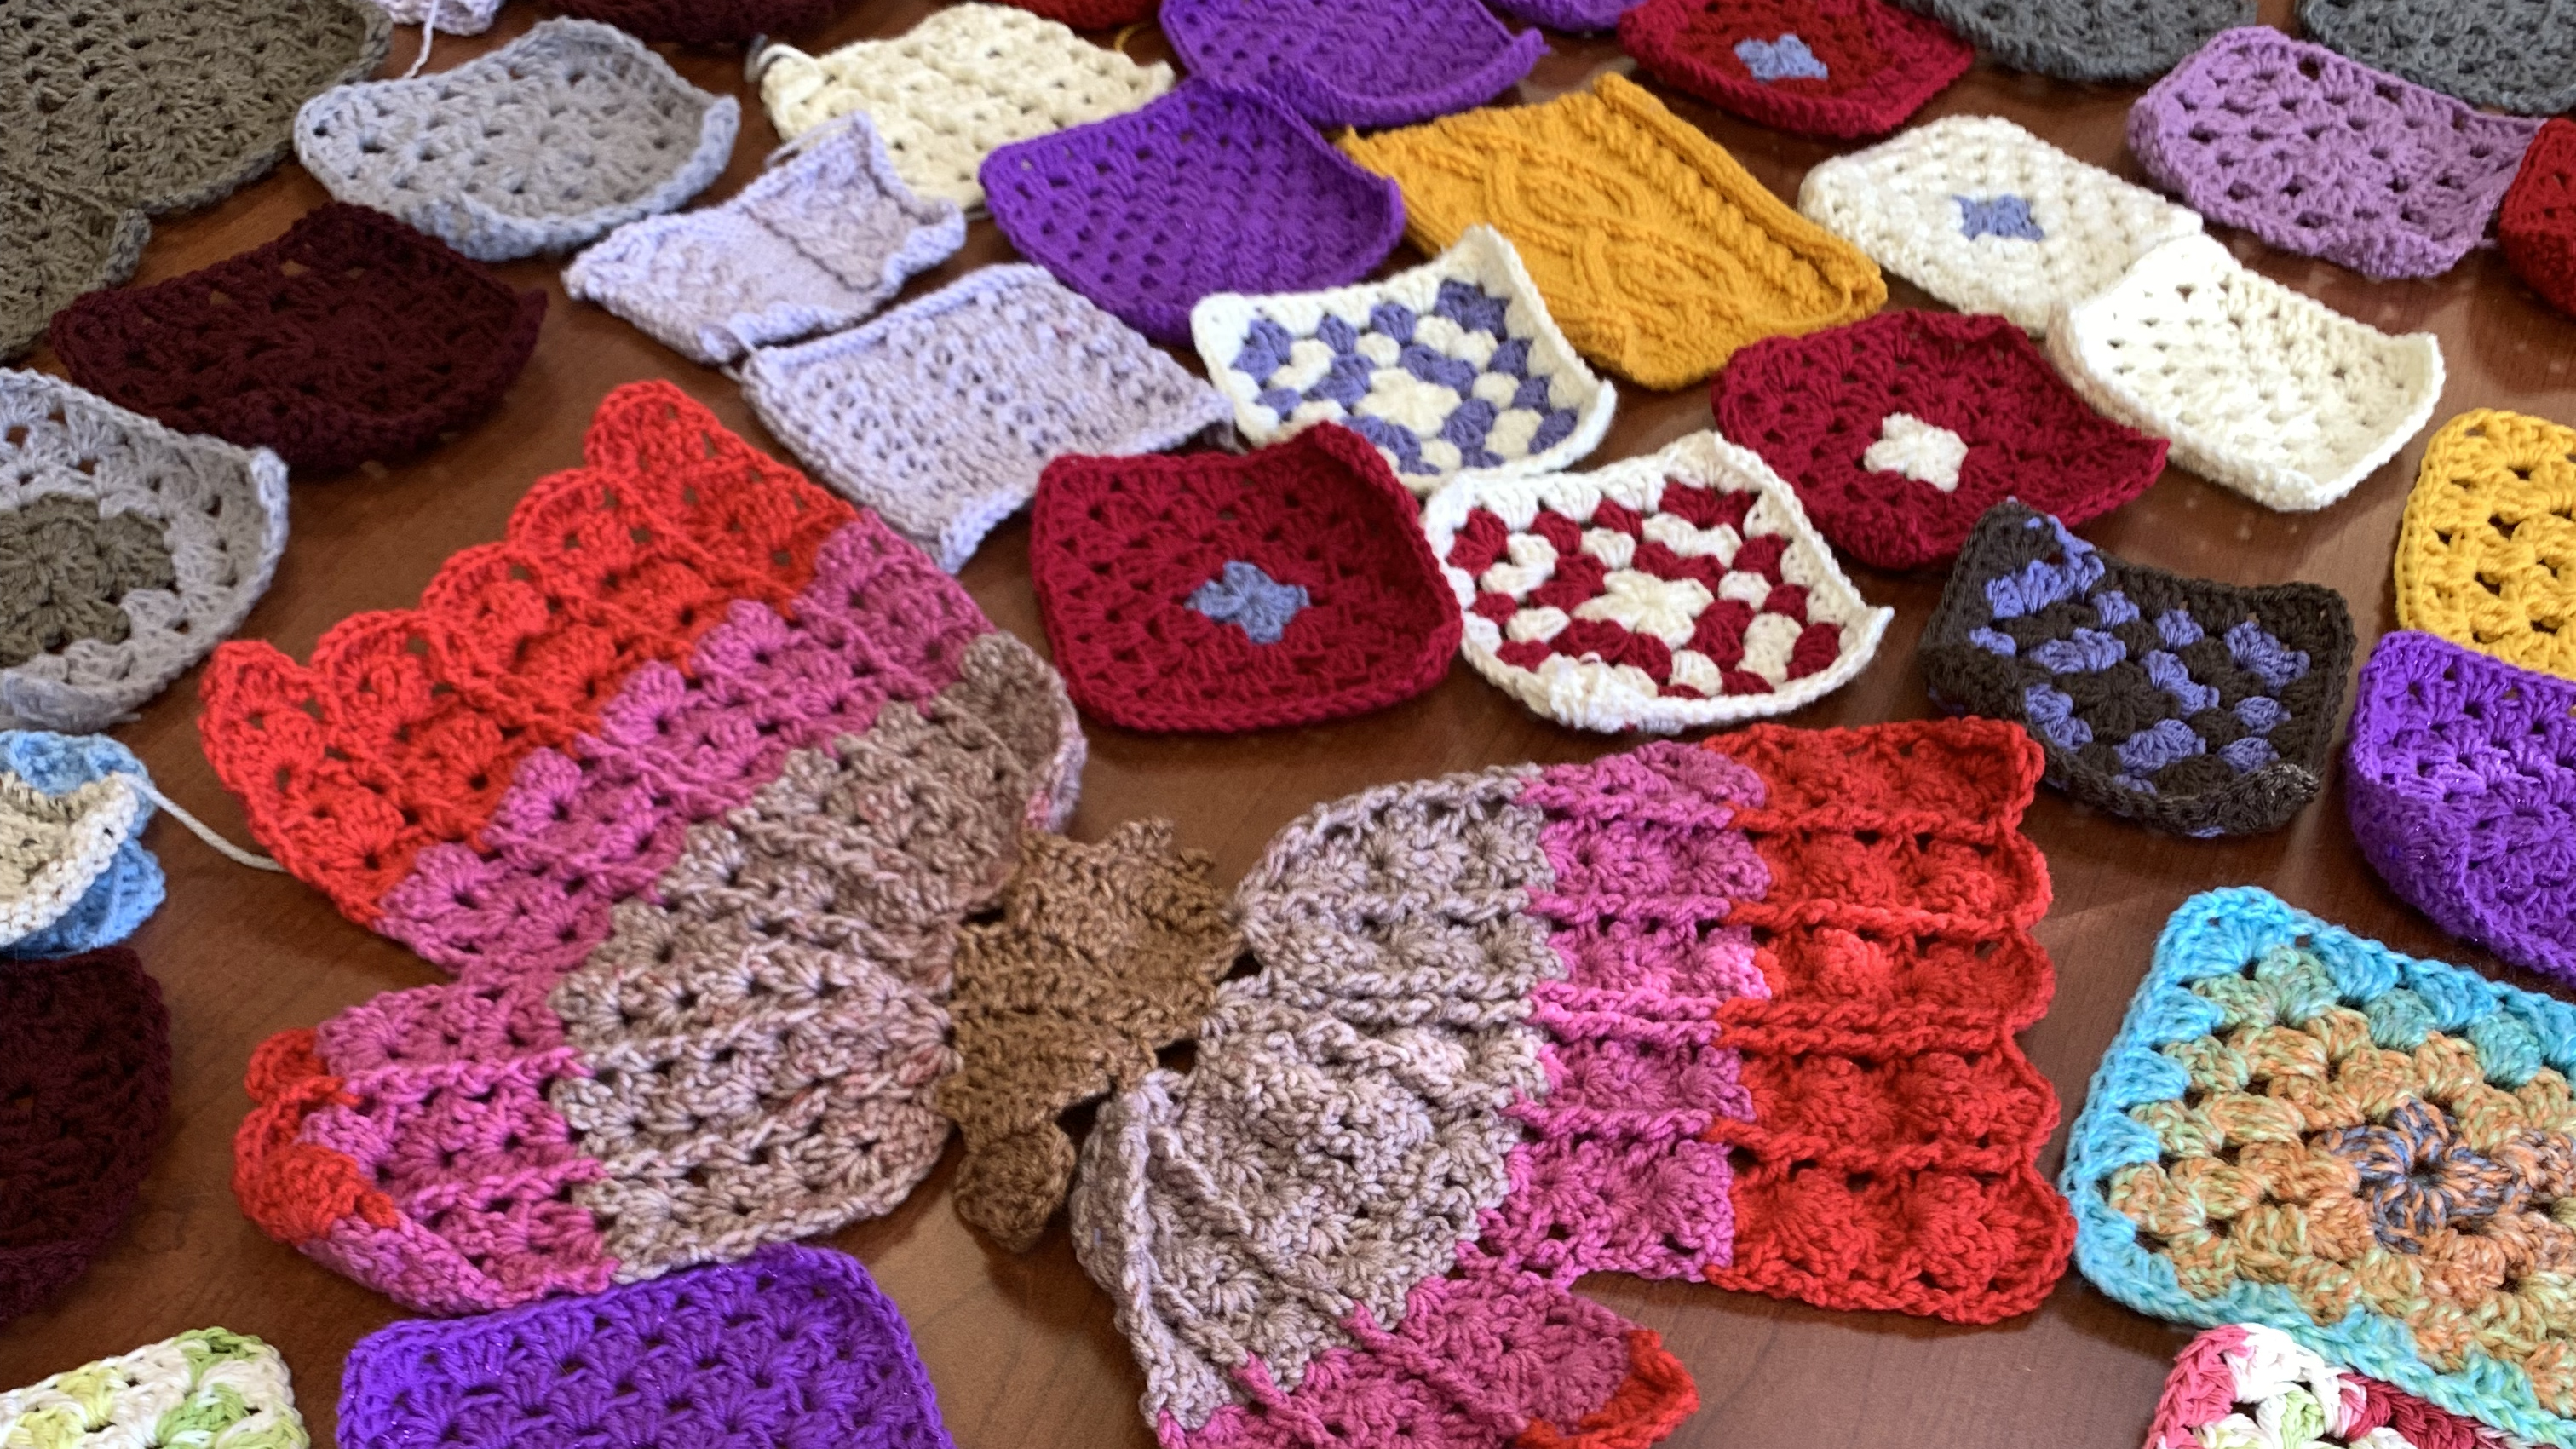 A colorful crochet butterfly in red, purple, tan and brown is centered amid a variety of crochet squares of all colors.